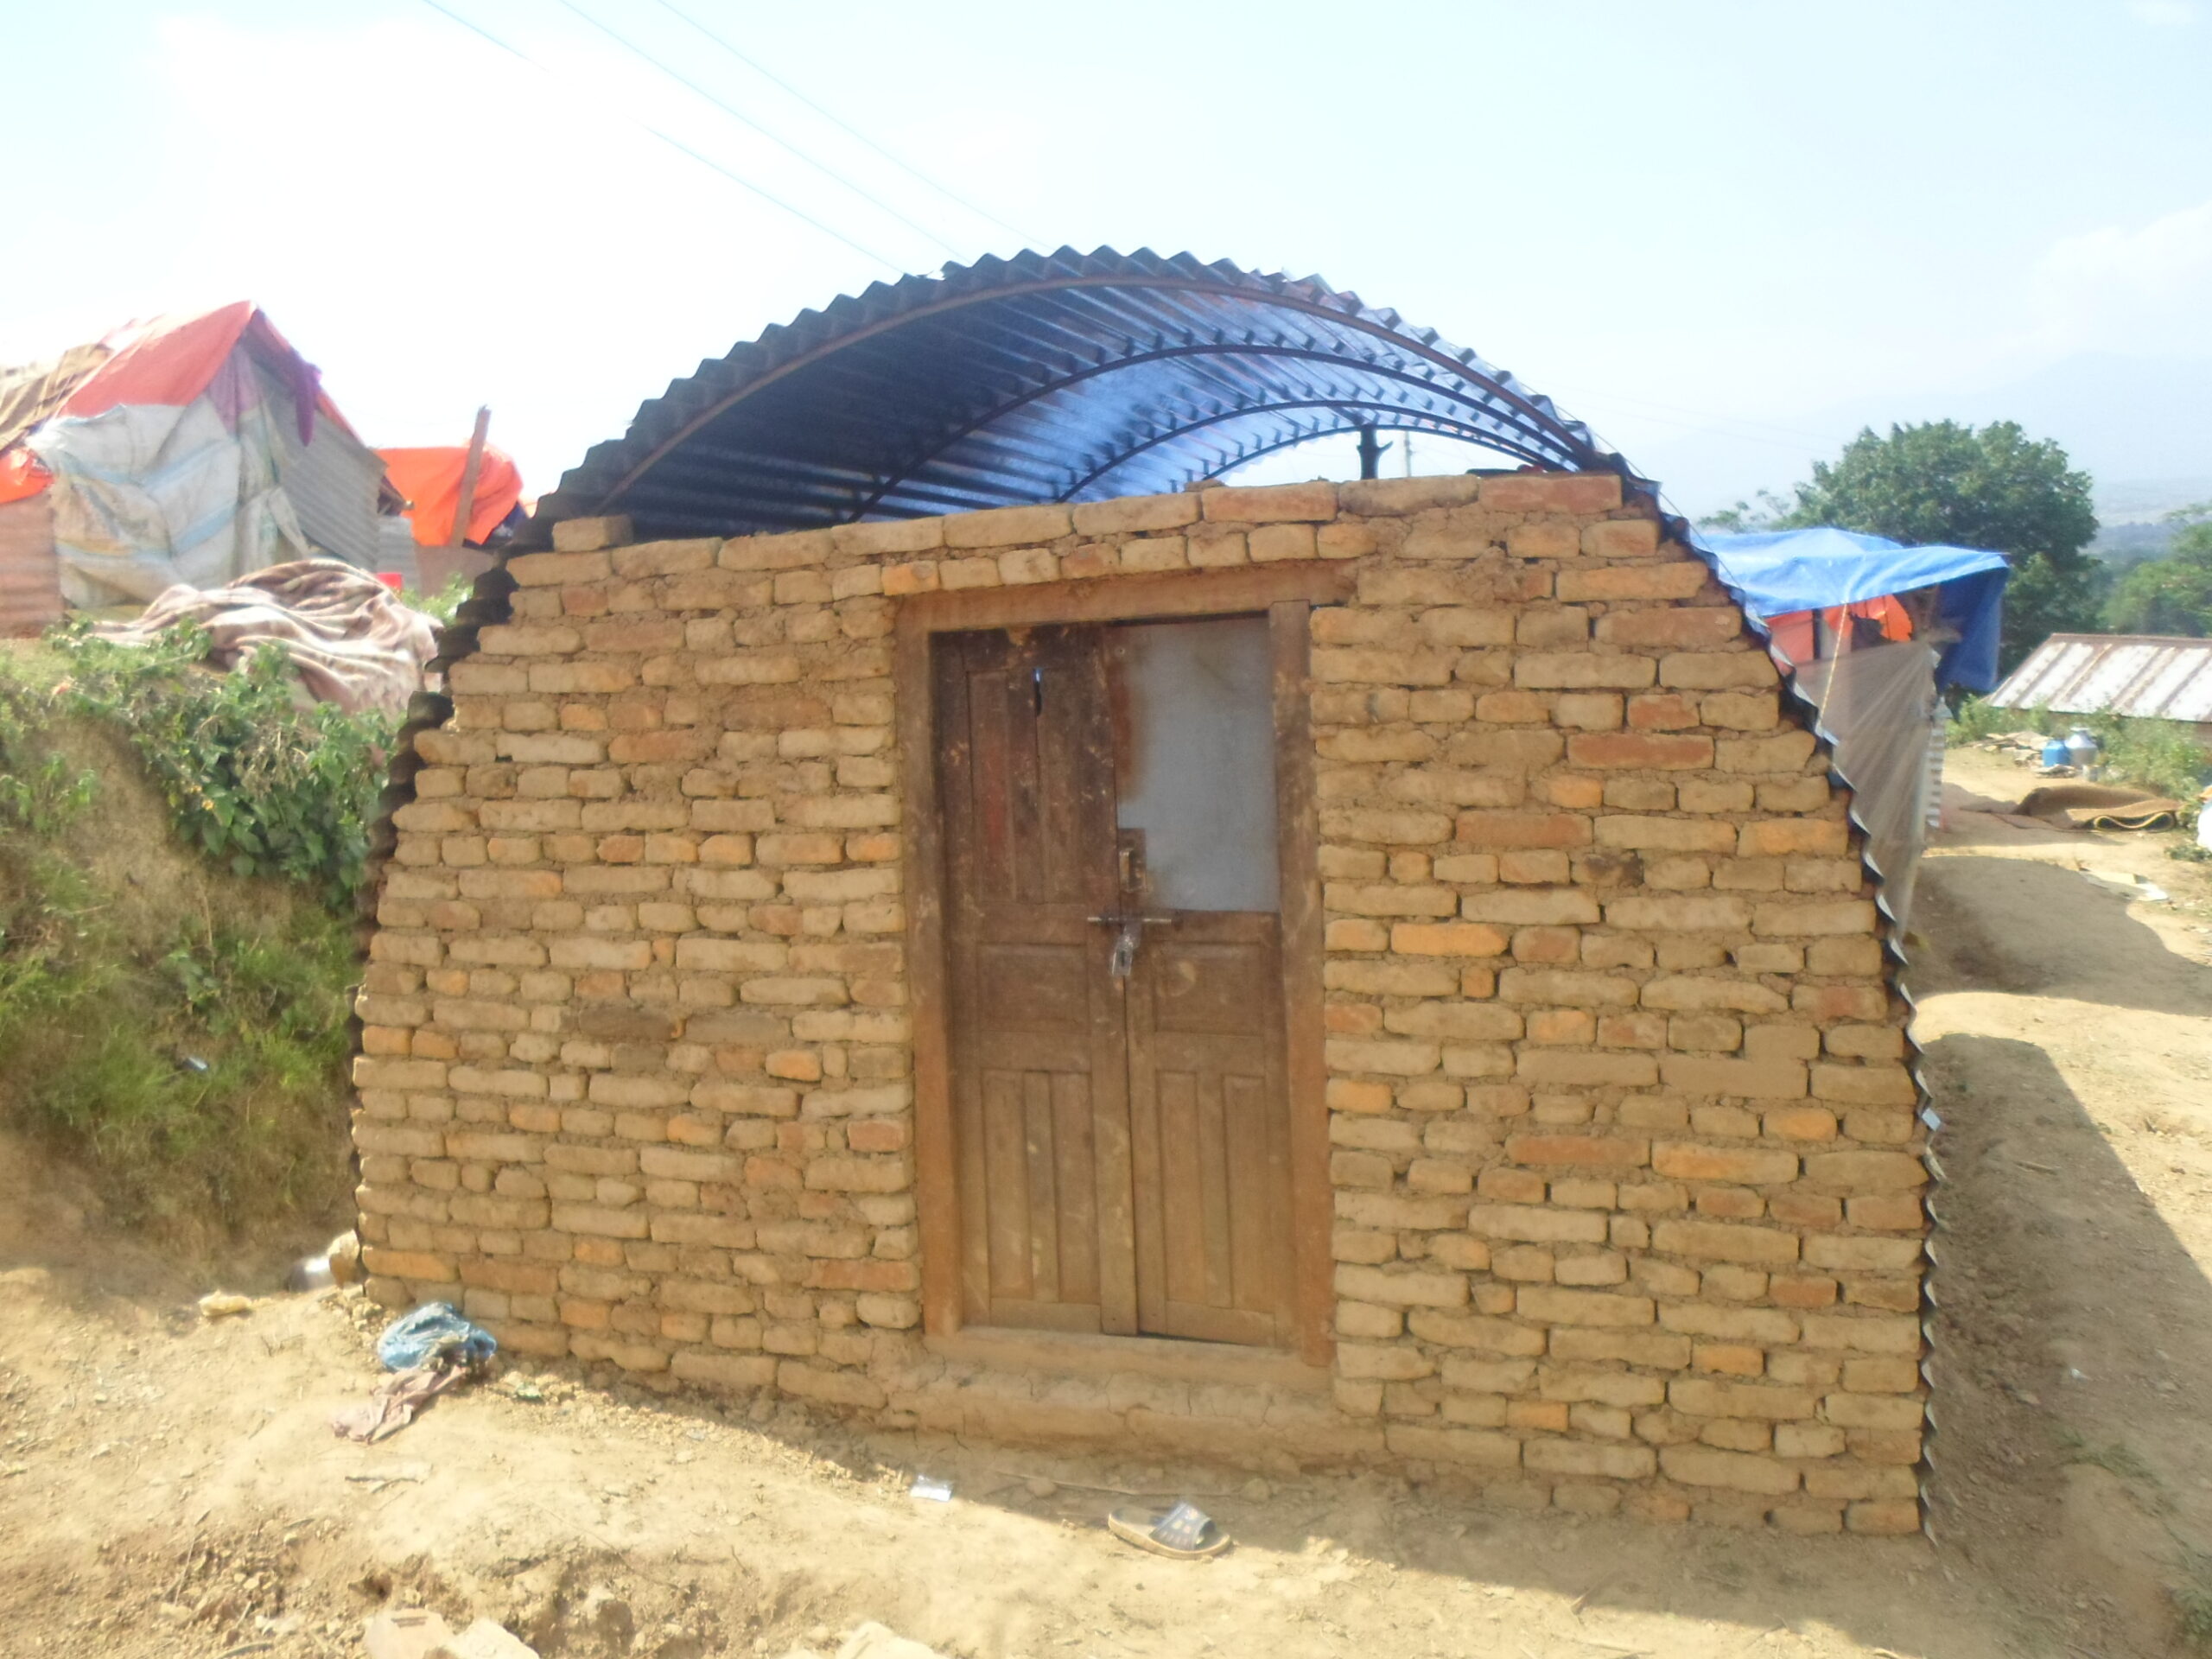 Global Peace Foundation volunteers and village locals build transitional shelters.